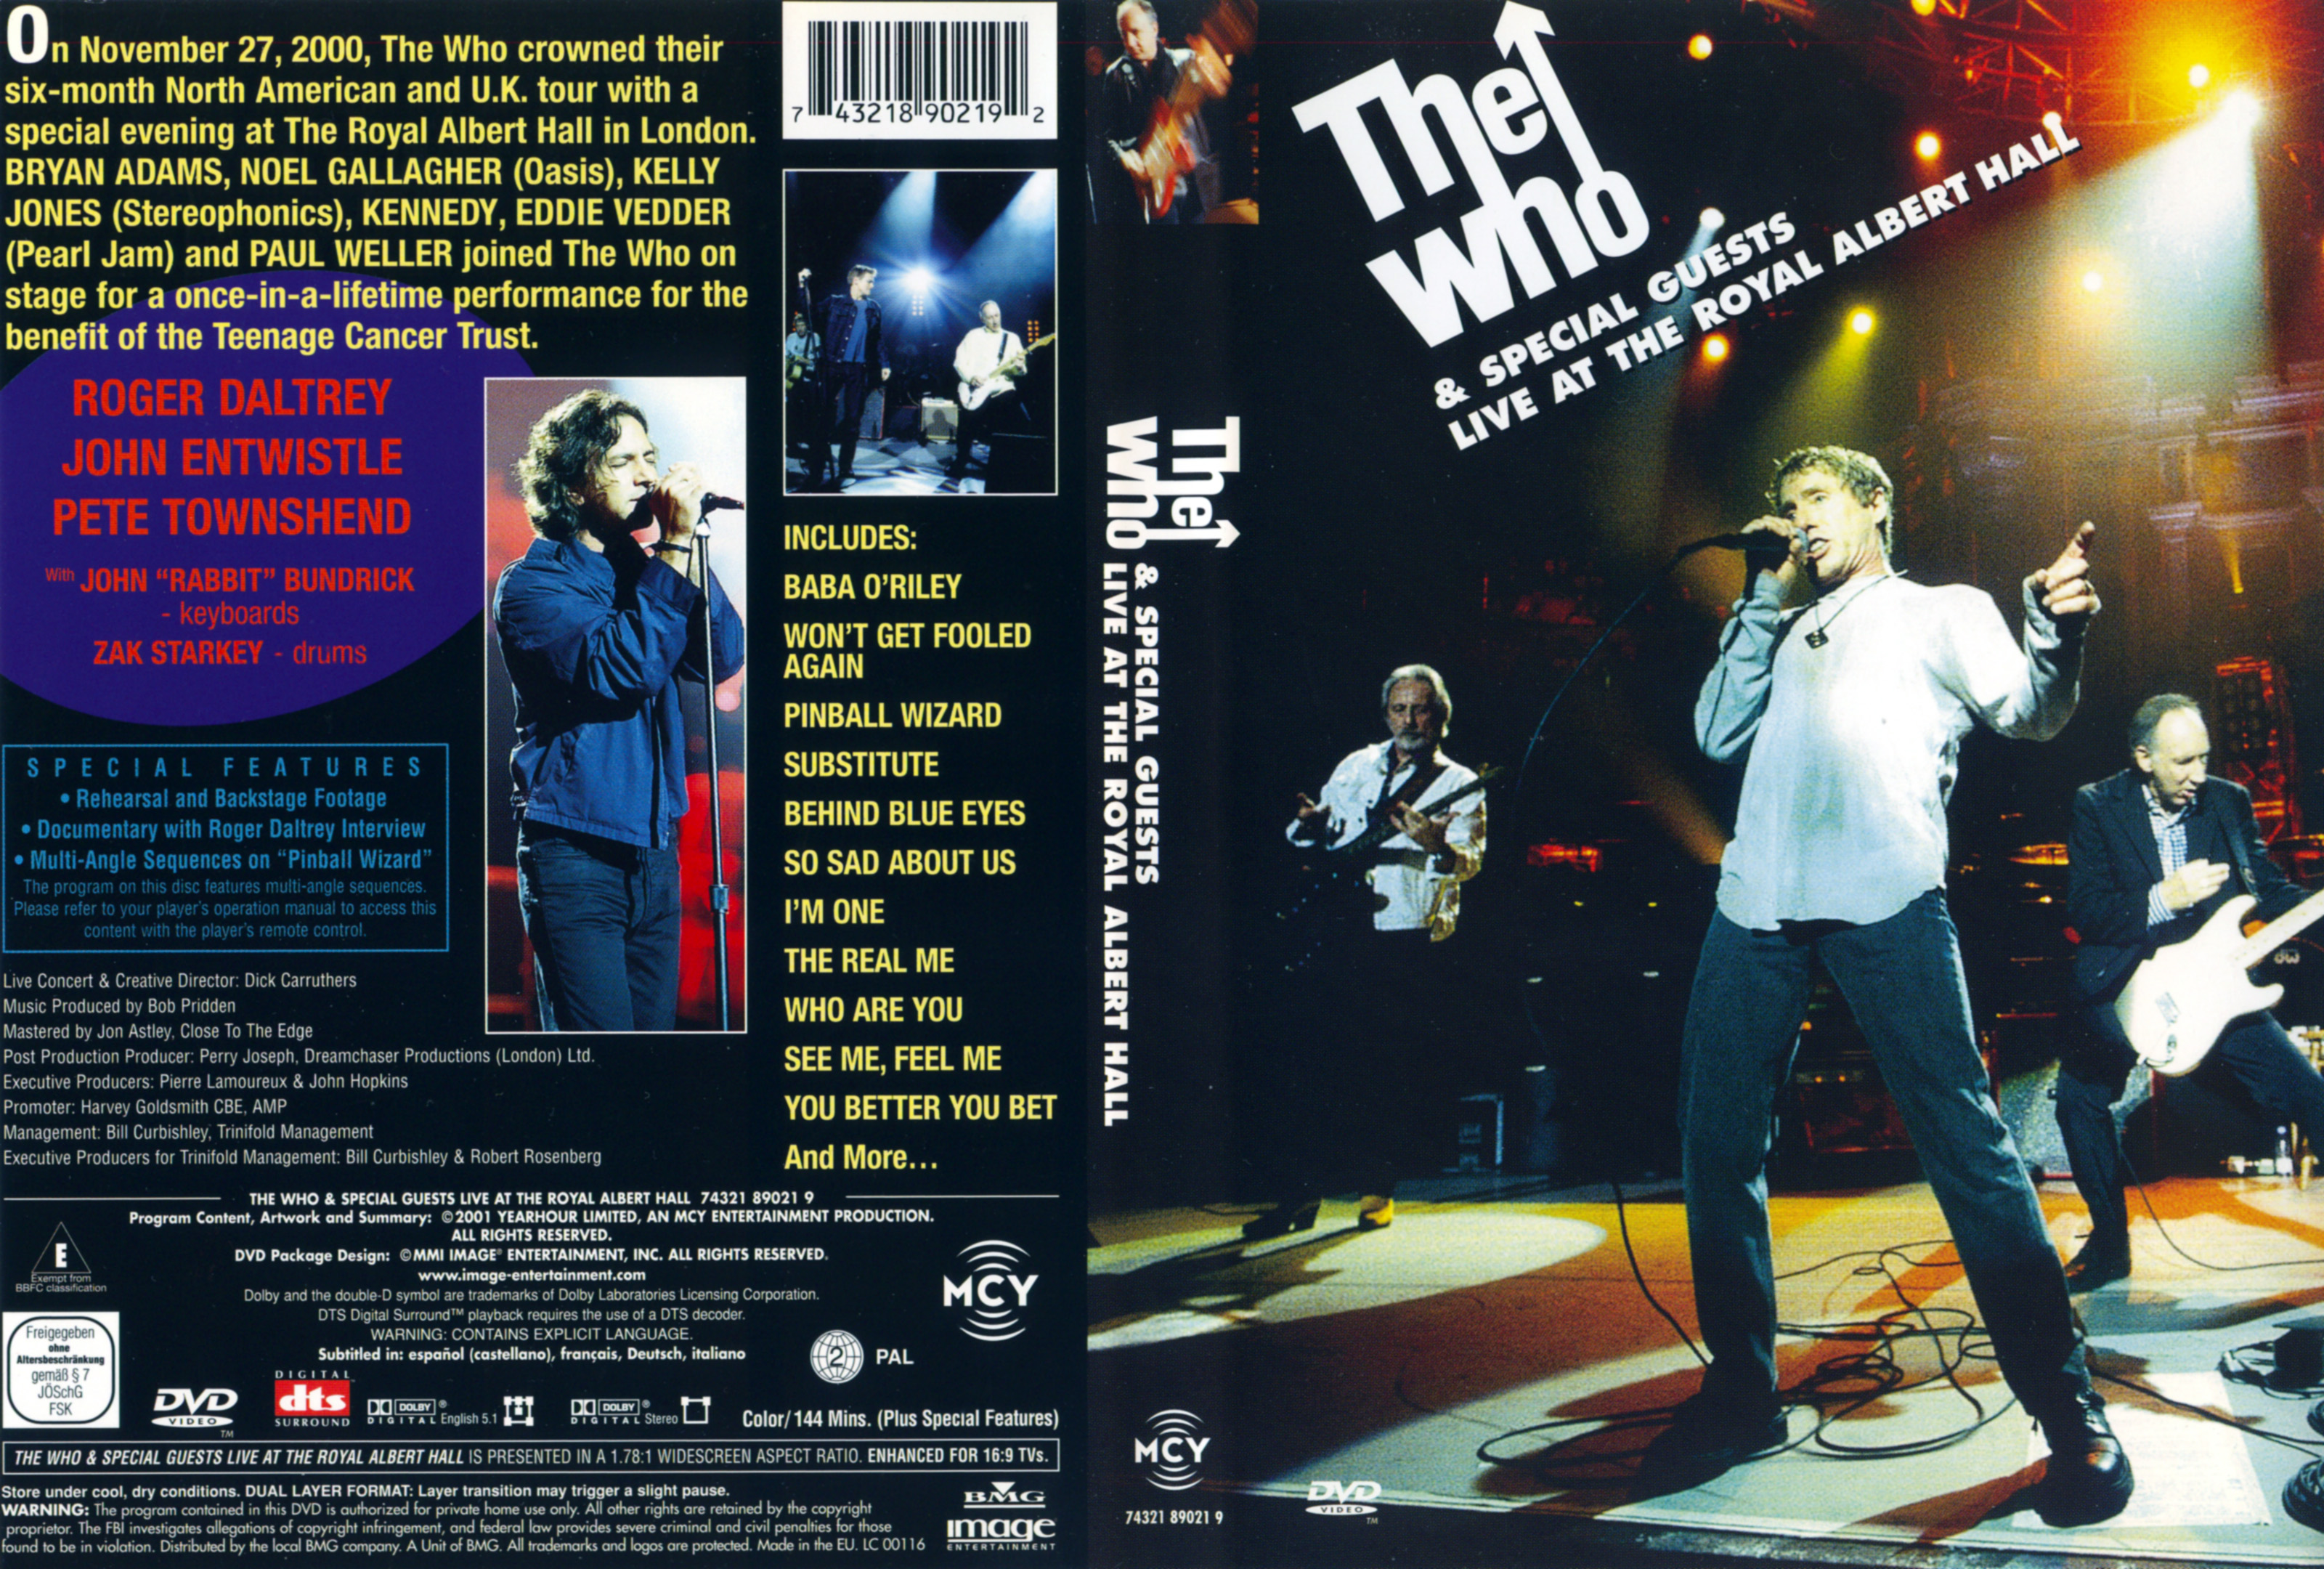 Jaquette DVD The Who Live royal Albert Hall